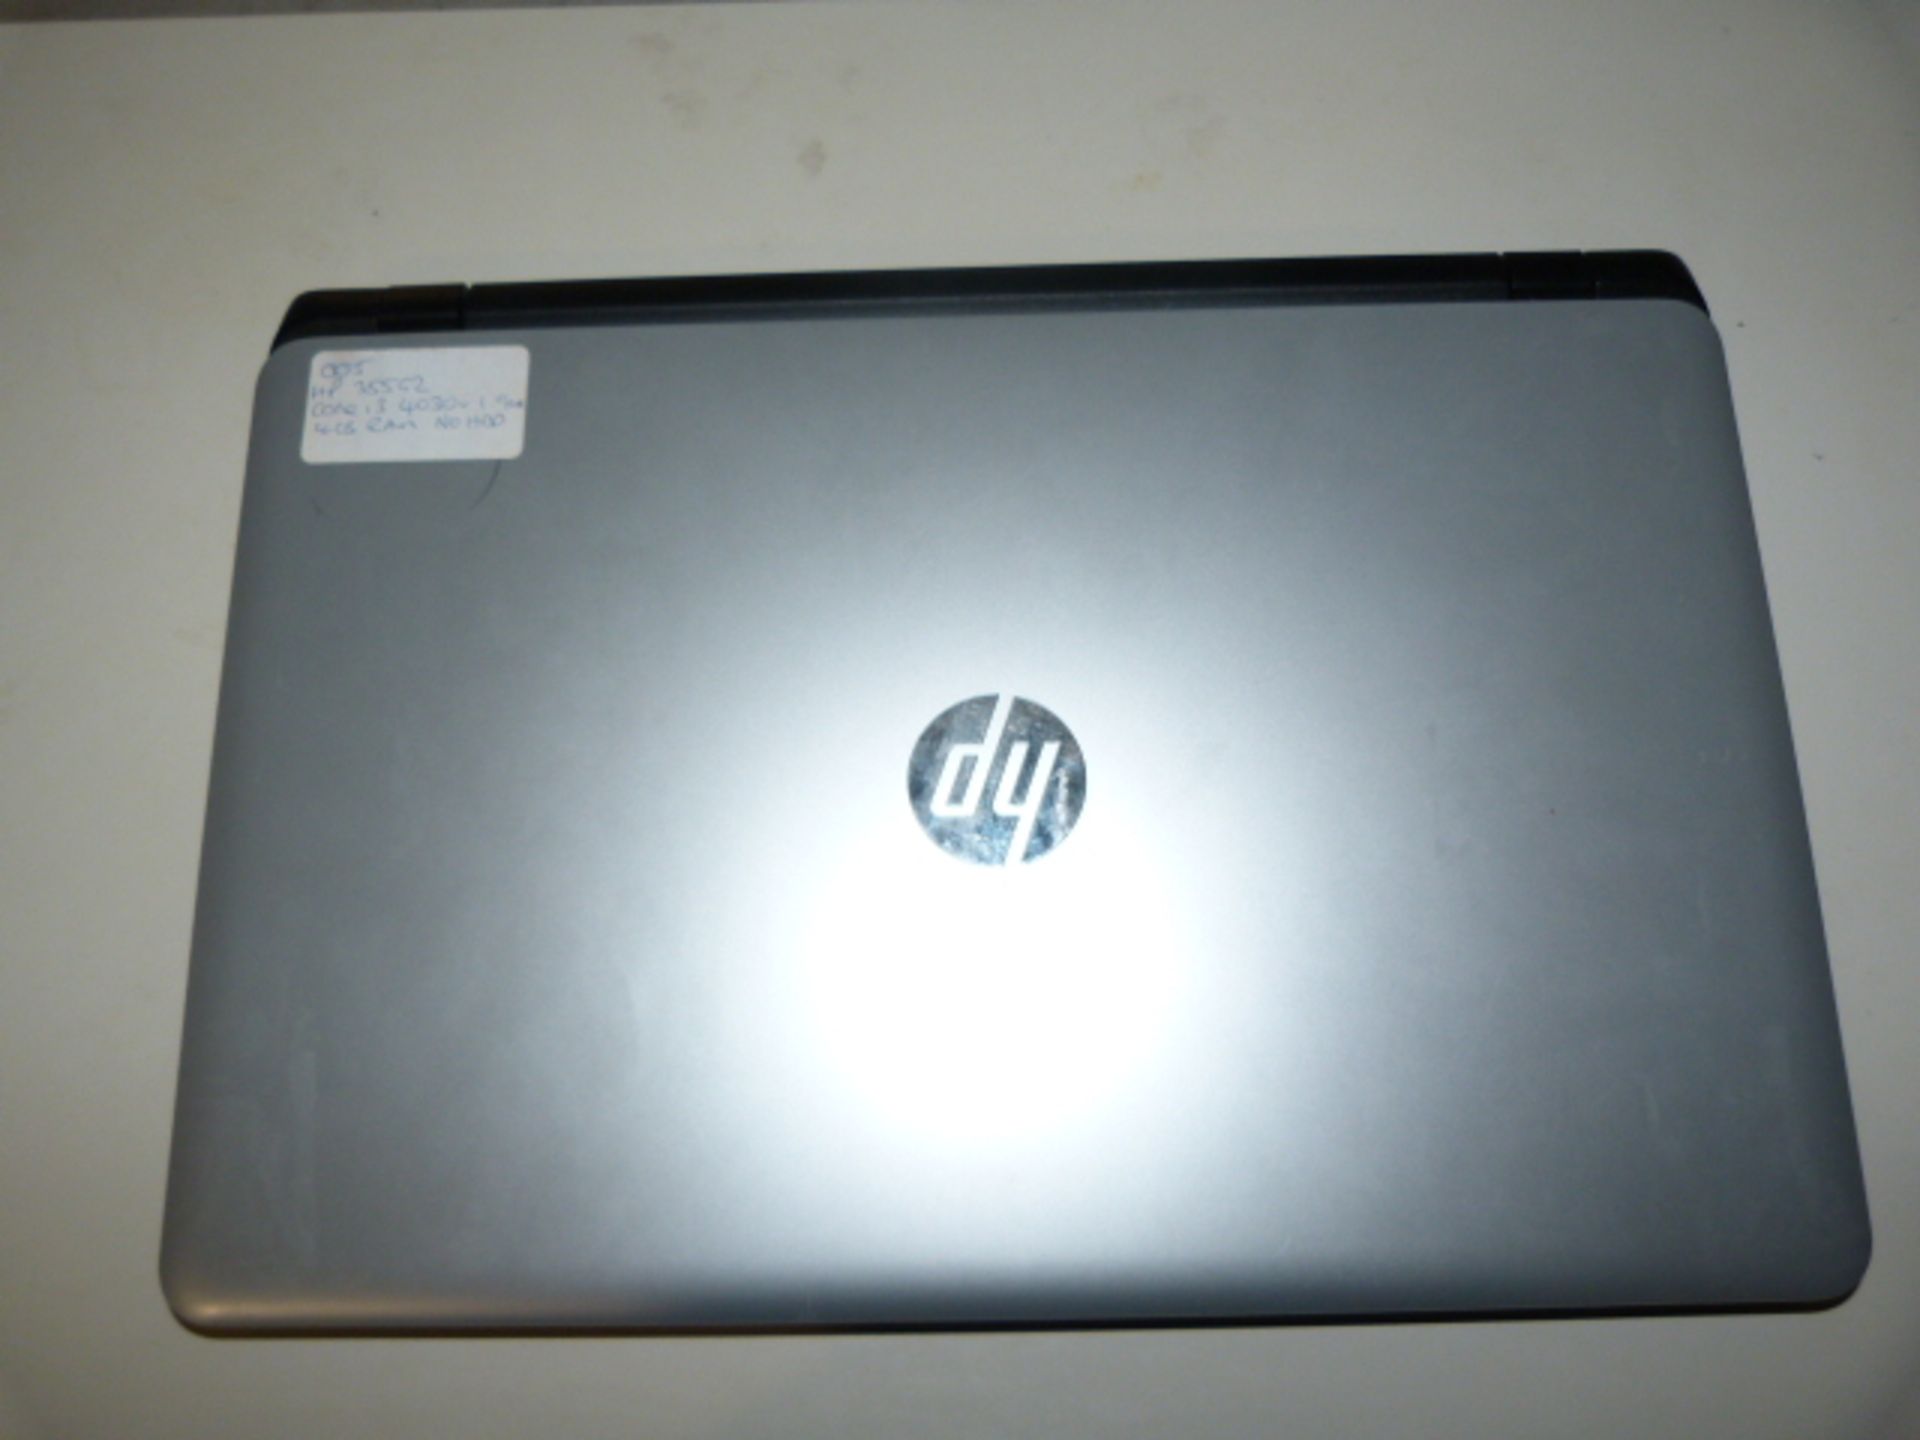 *HP 355 G2 AMD A4 6210 R3 GRAPHICS @ 1.8ghz 4GB NO HDD WINDOWS 8 STICKER NOT INSTALLED NO PSU - Image 2 of 3